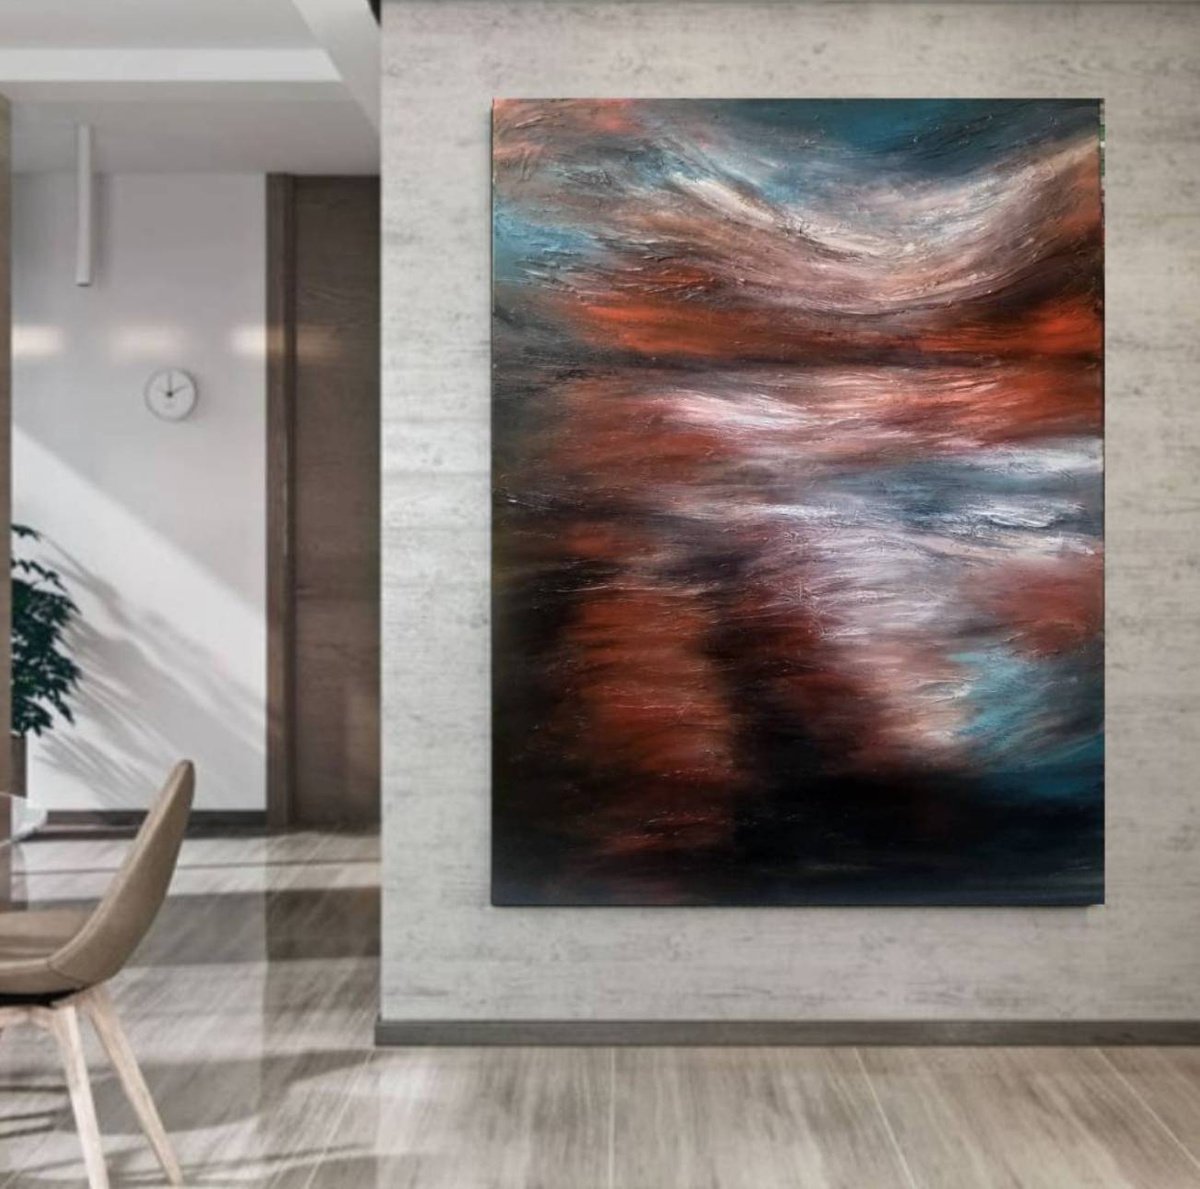 Reflections, 90x120cm Abstract Textured Painting by Alexandra Petropoulou